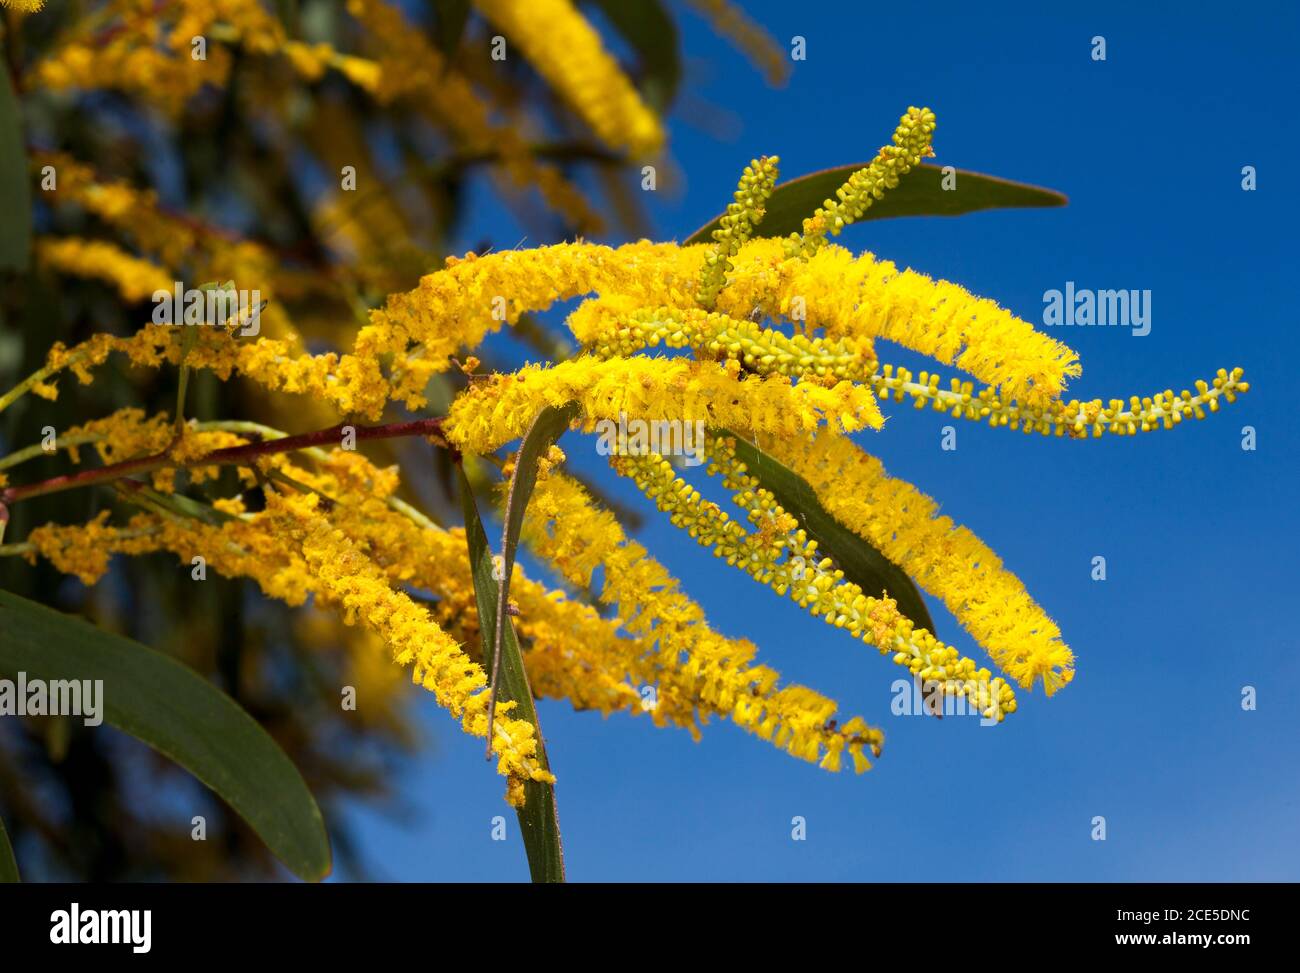 Cluster of long vivid yellow flowers of wattle tree, Acacia crassa subspecies longicoma, against background of blue sky in outback Australia Stock Photo